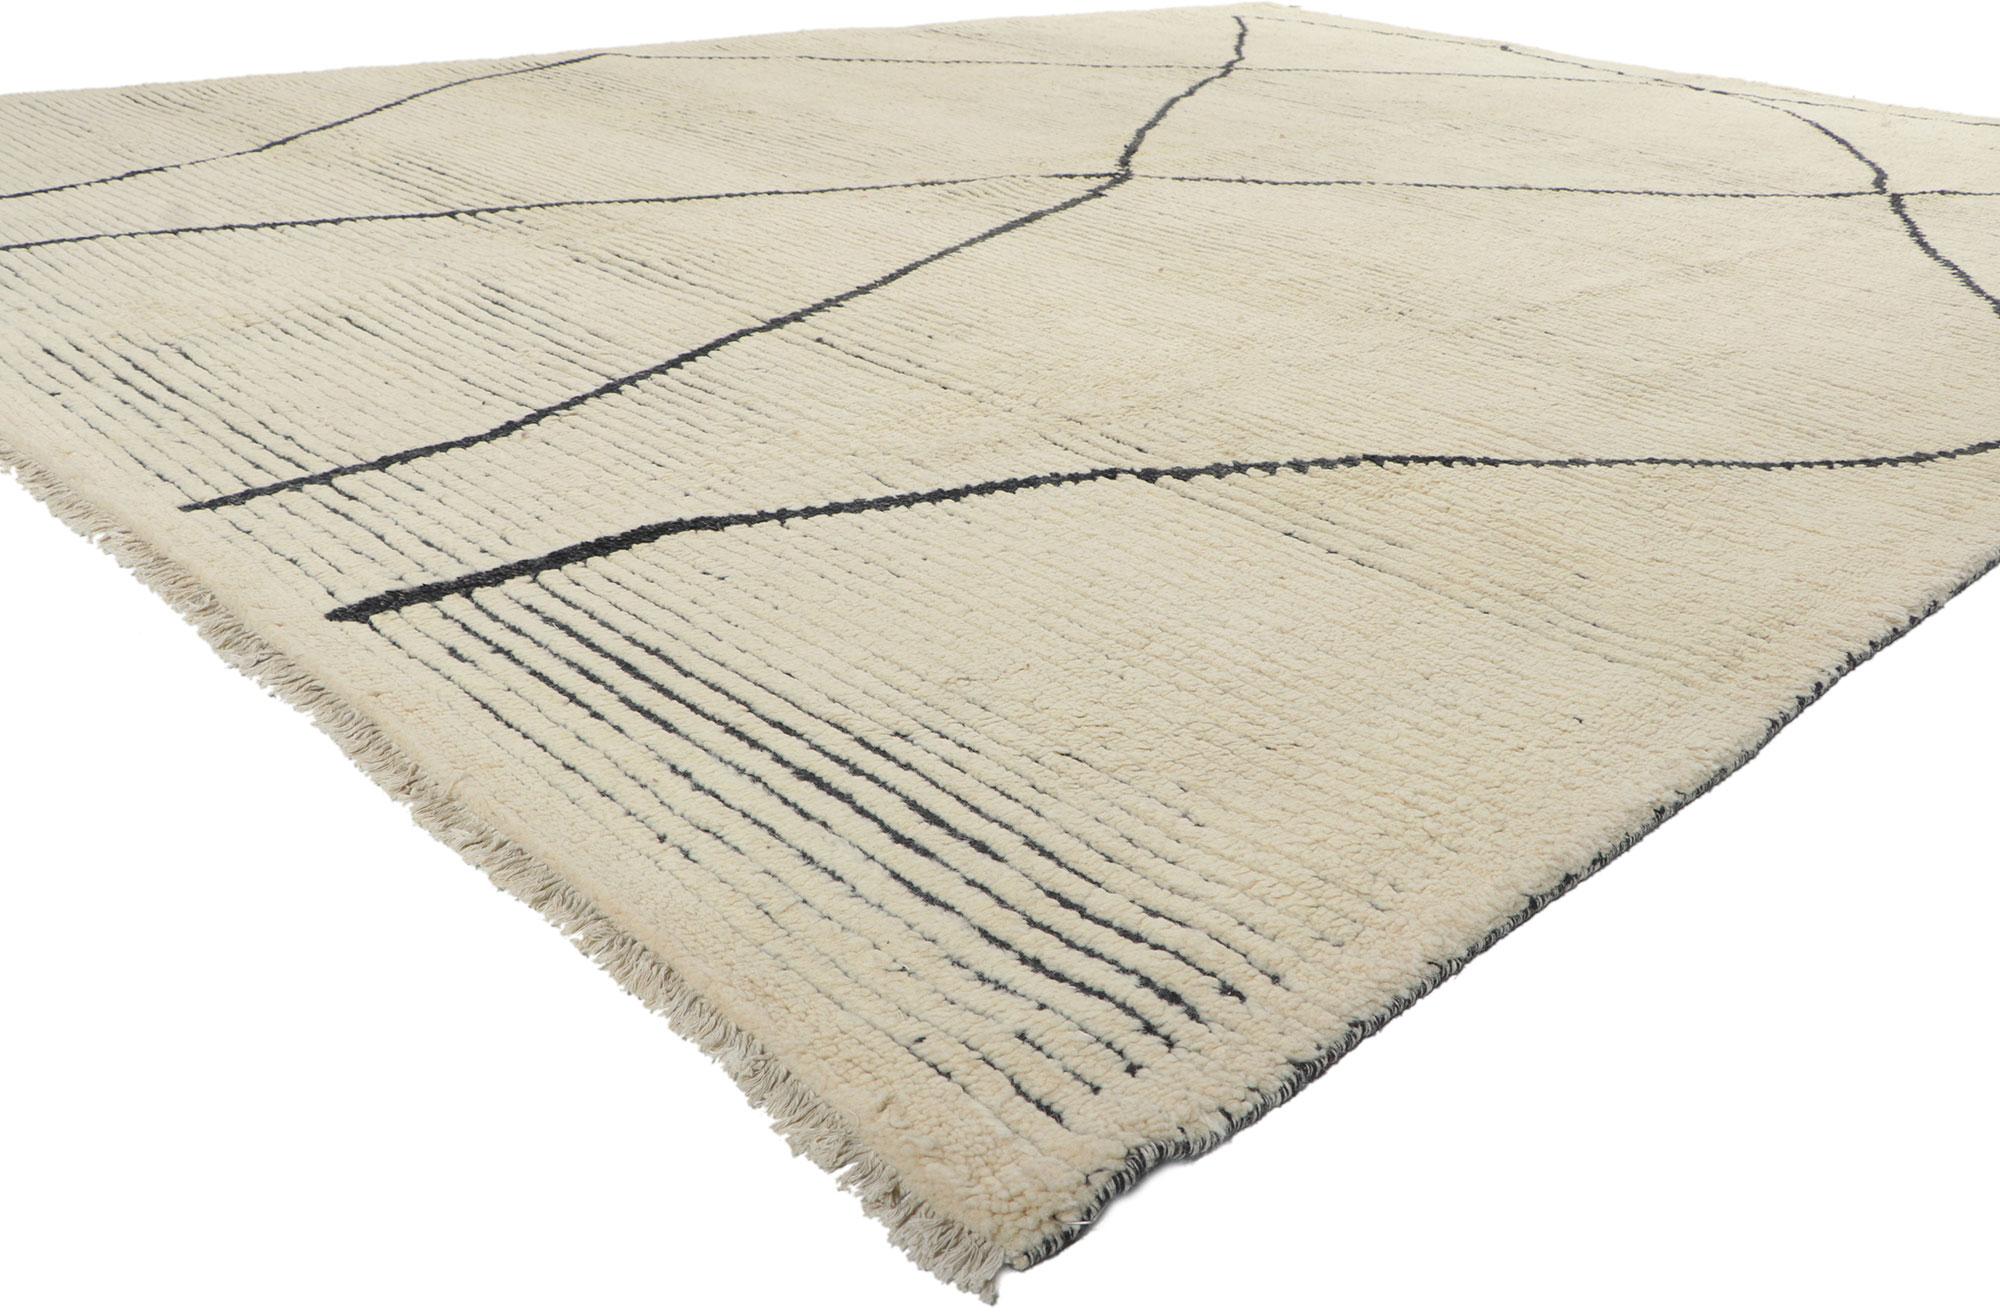 80589 New Modern Moroccan Area Rug, 10'05 x 13'08.
Emanating modern style with a plush pile, this hand knotted wool Moroccan style rug is a captivating vision of woven beauty. The simplistic design and neutral colorway woven into this piece work